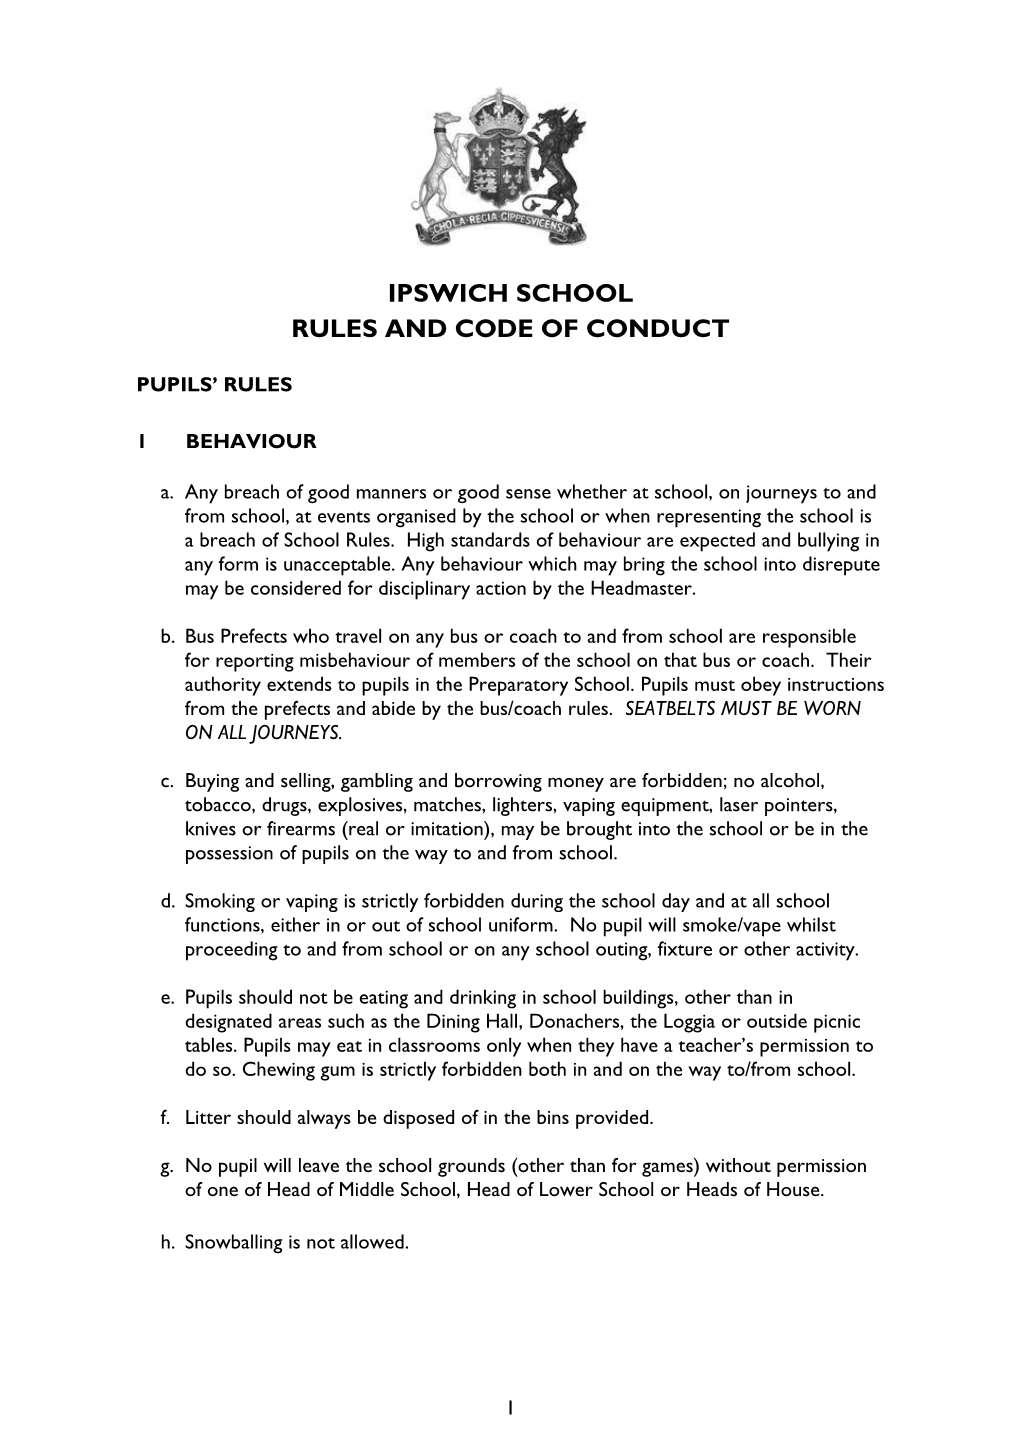 Ipswich School Rules and Code of Conduct